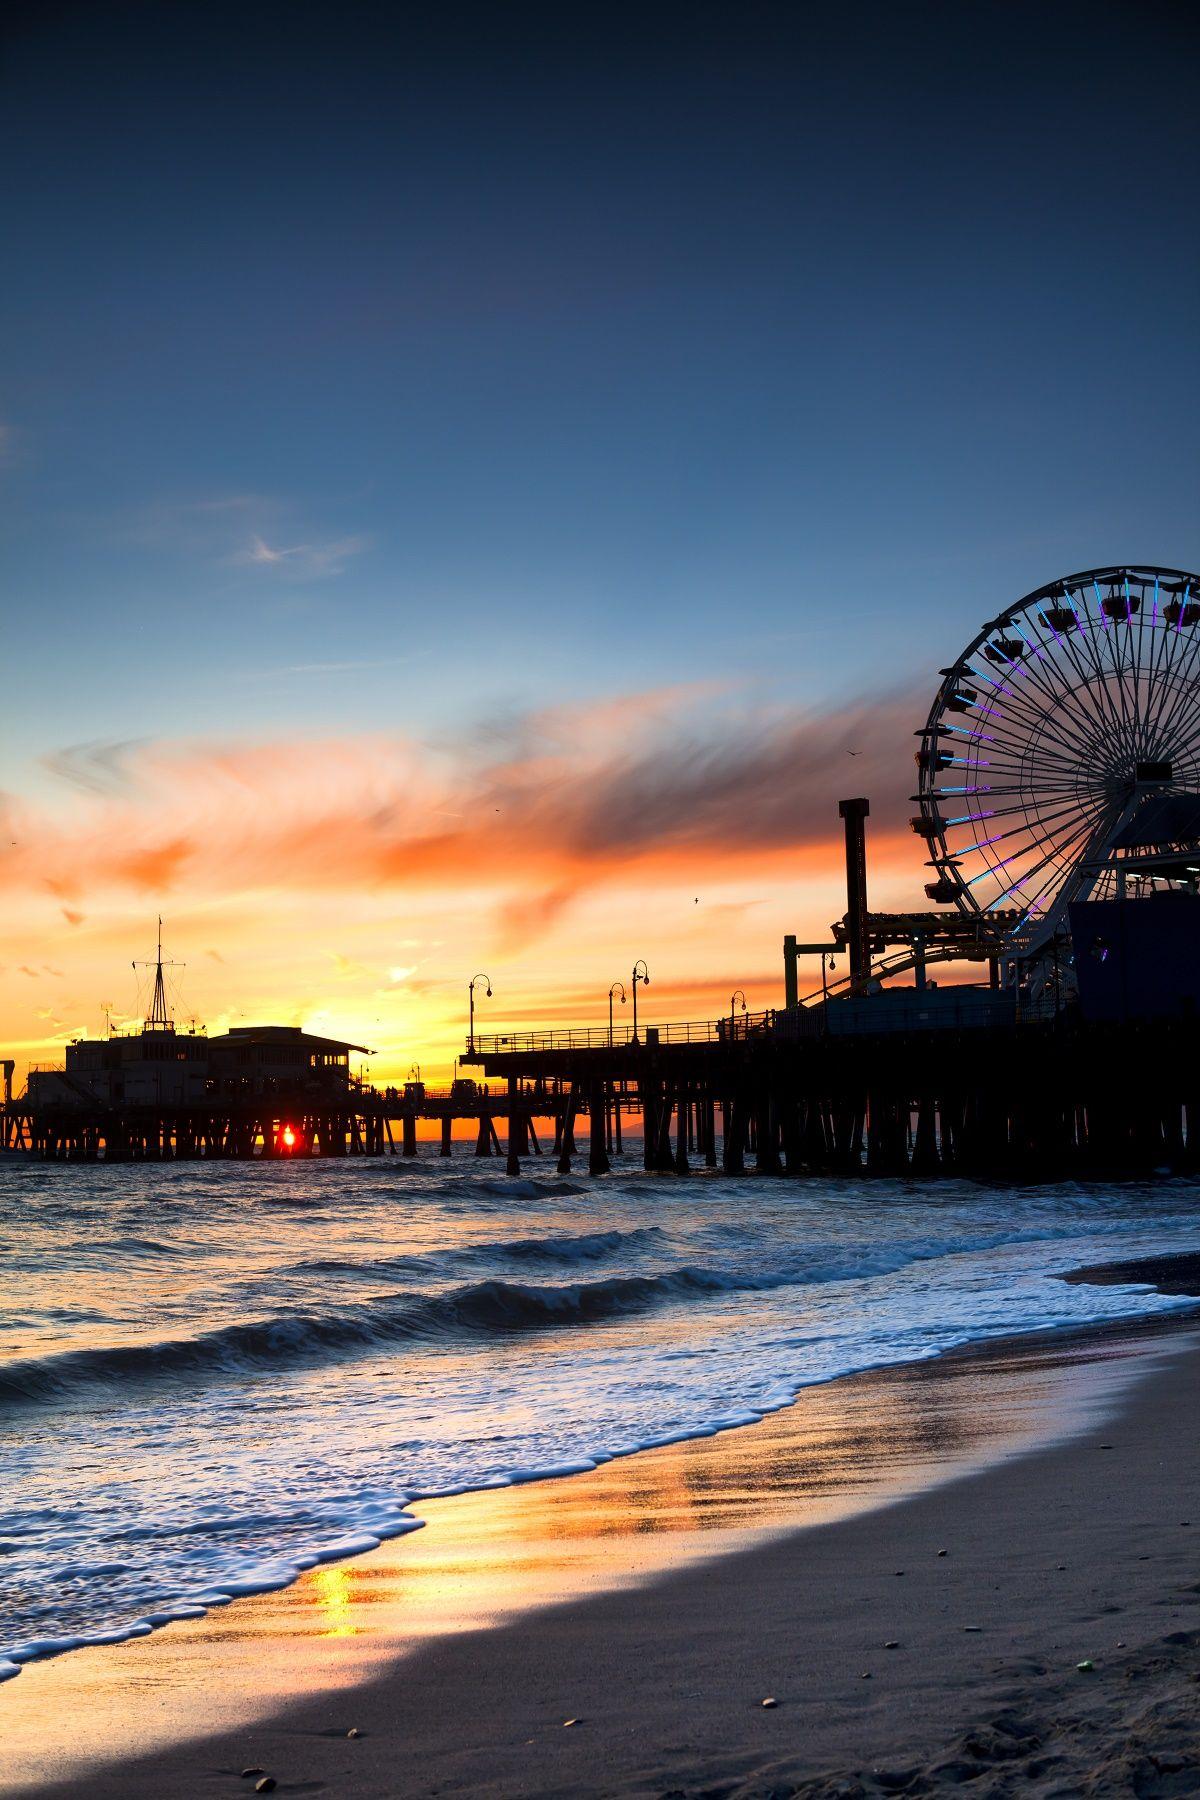 When in Los Angeles be sure to check out Santa Monica! Ride rides